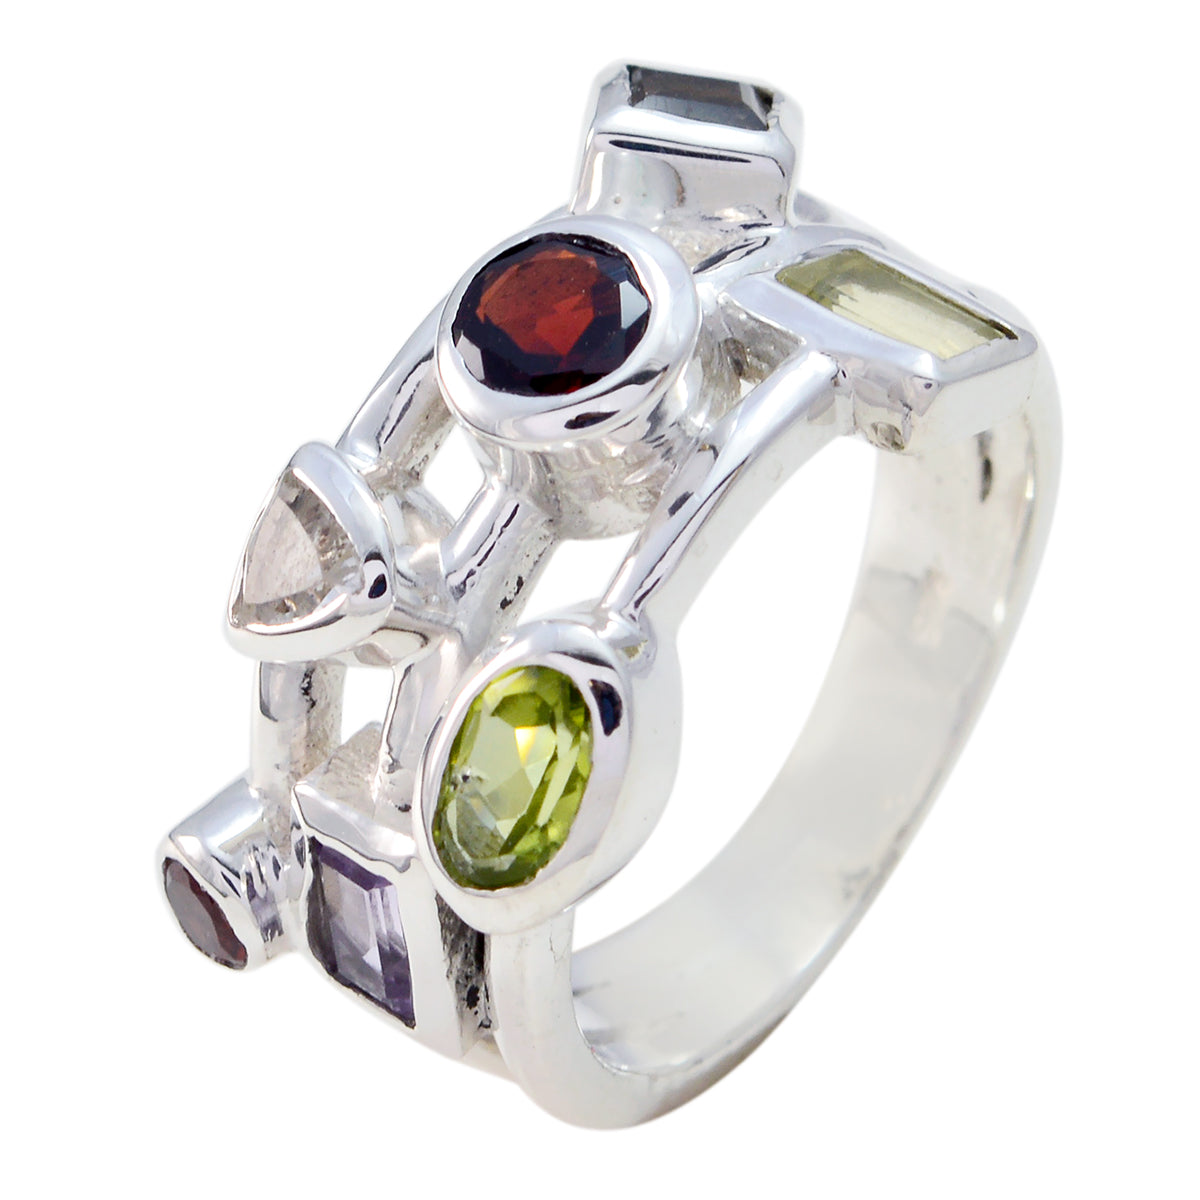 Appealing Gems Multi Stone Sterling Silver Ring Birthstones Jewelry